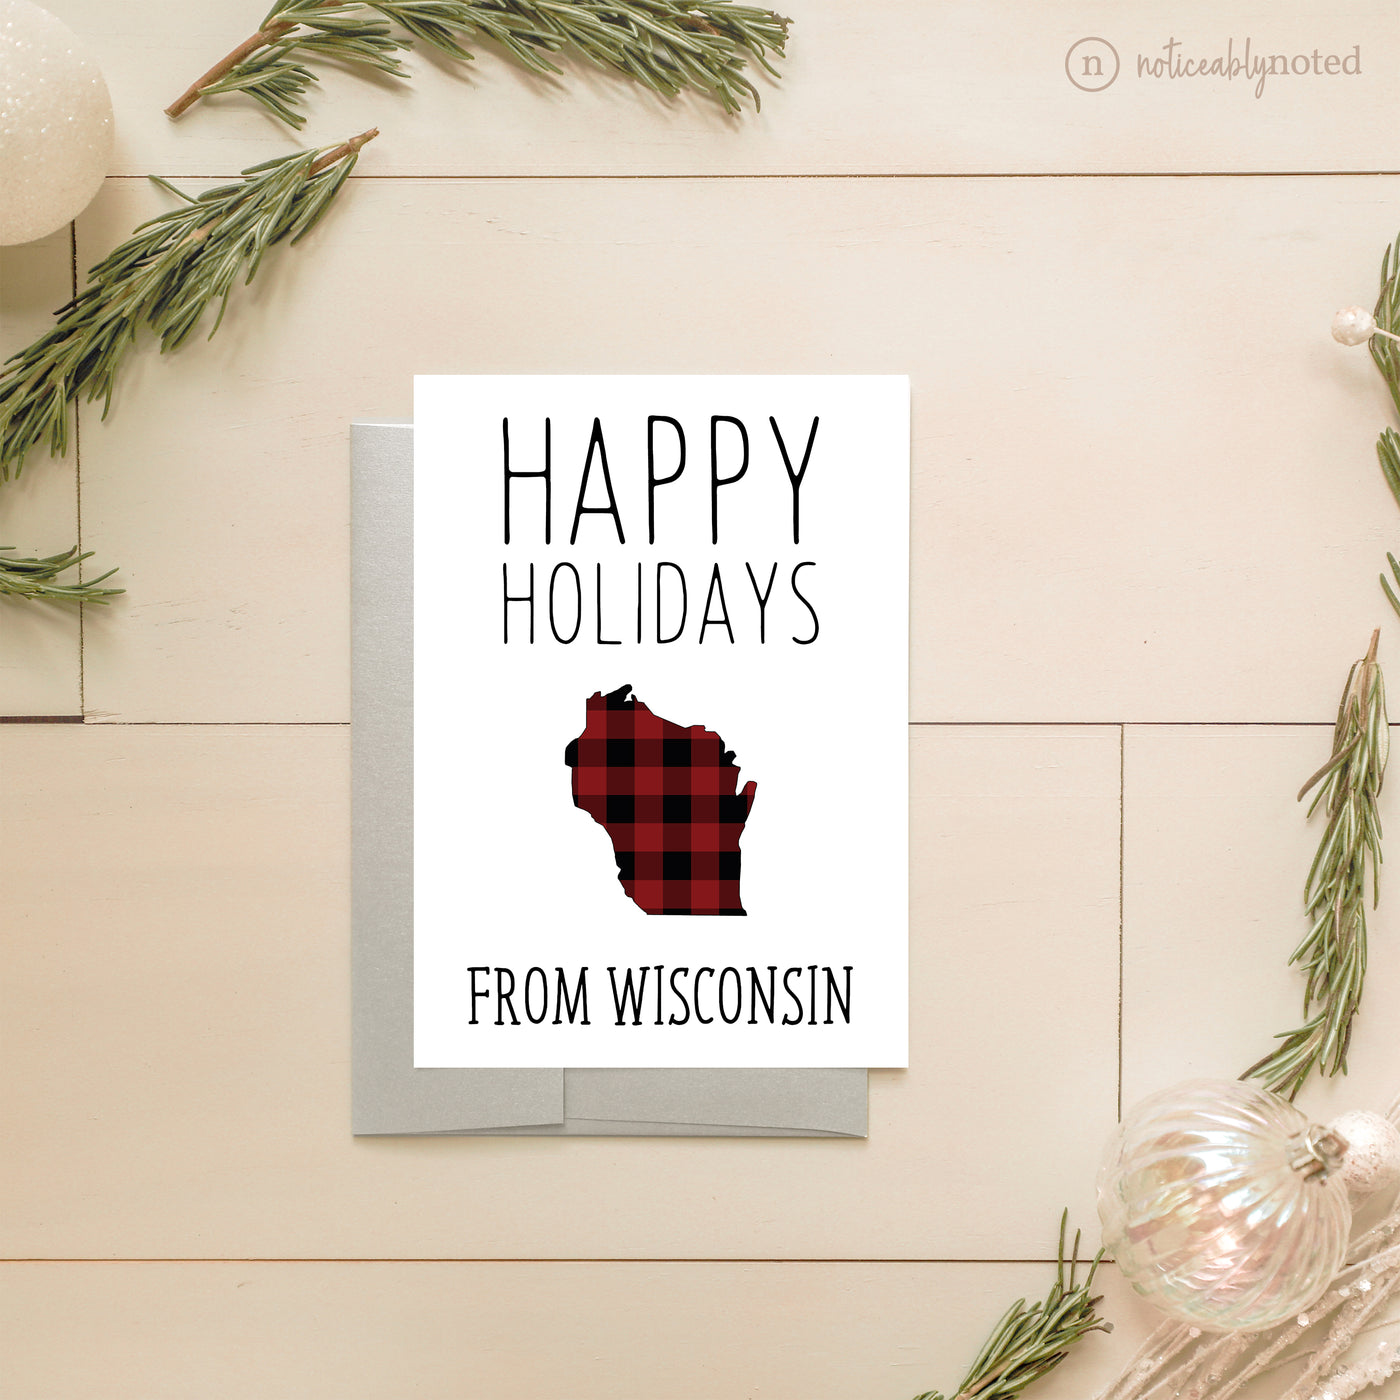 Wisconsin Holiday Card - Happy Holidays | Noticeably Noted